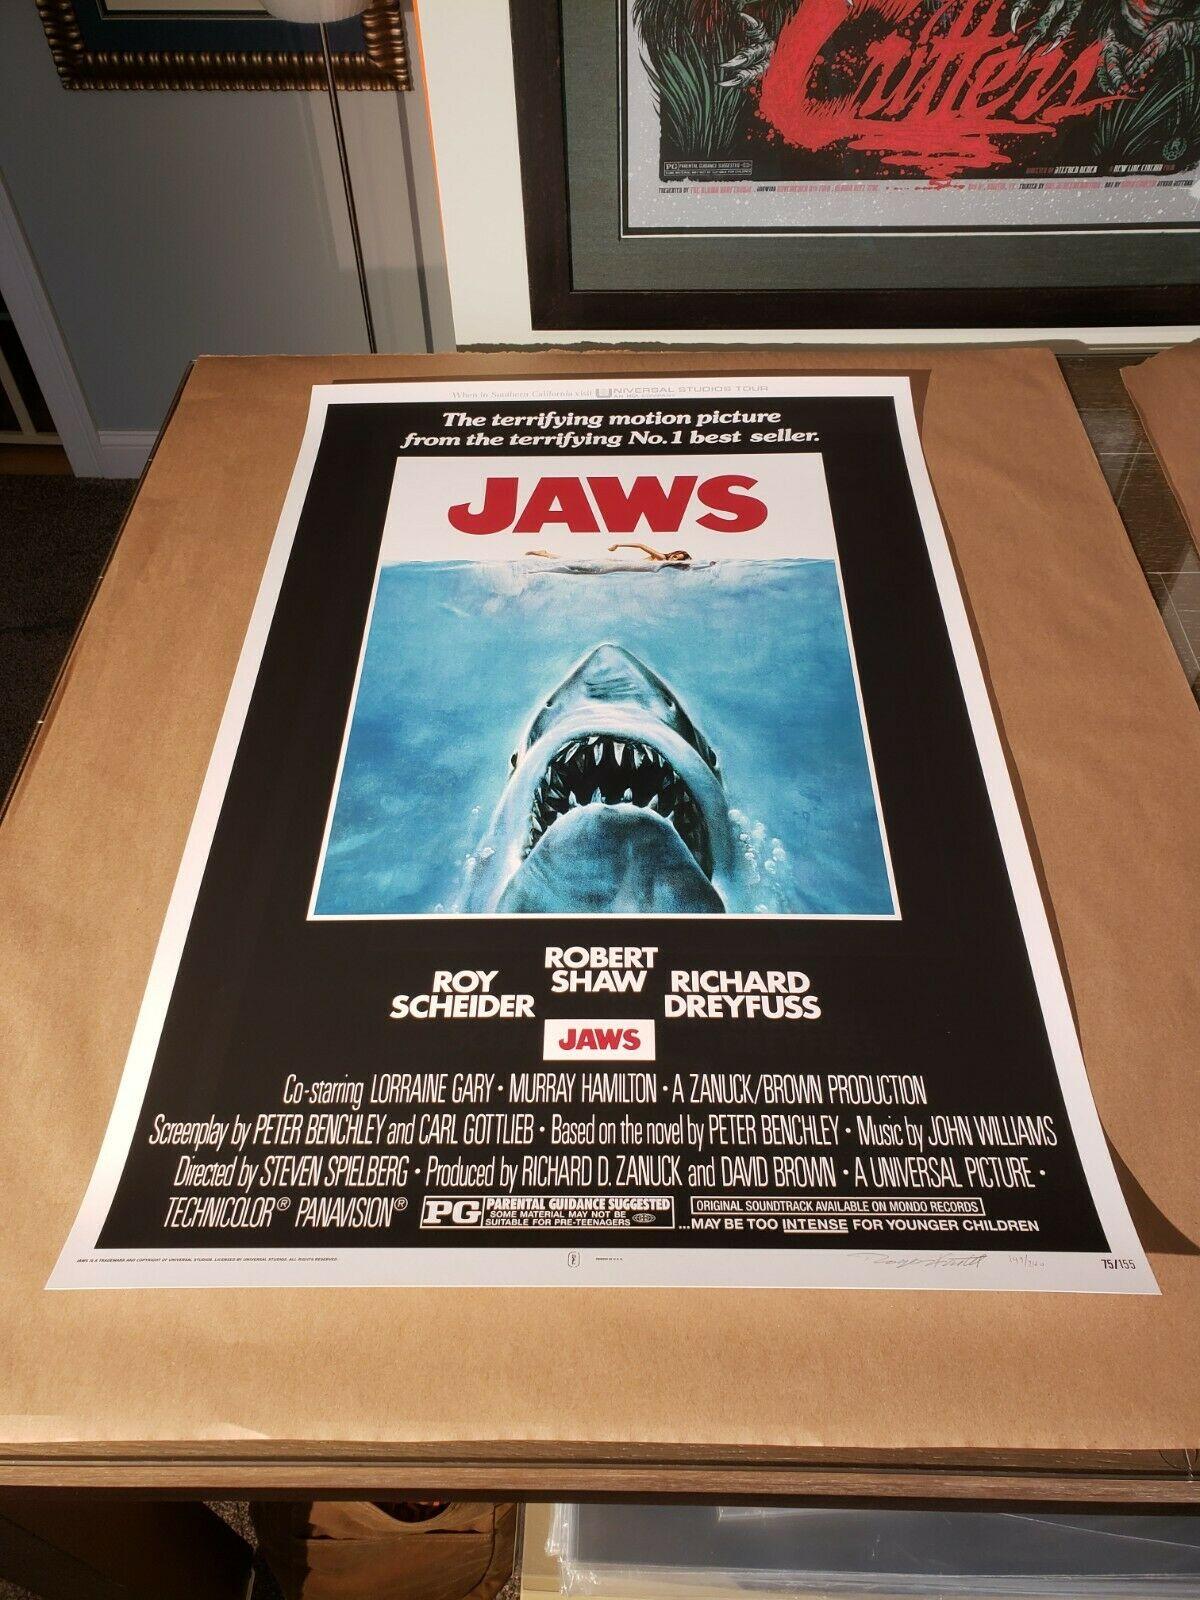 In 1975, Steven Spielberg changed cinema and film-loving audiences forever when he gave the world it's first summer blockbuster, 
JAWS, and nothing was ever the same again. Not only is JAWS an all-time film from an all-time filmmaker, 
an added